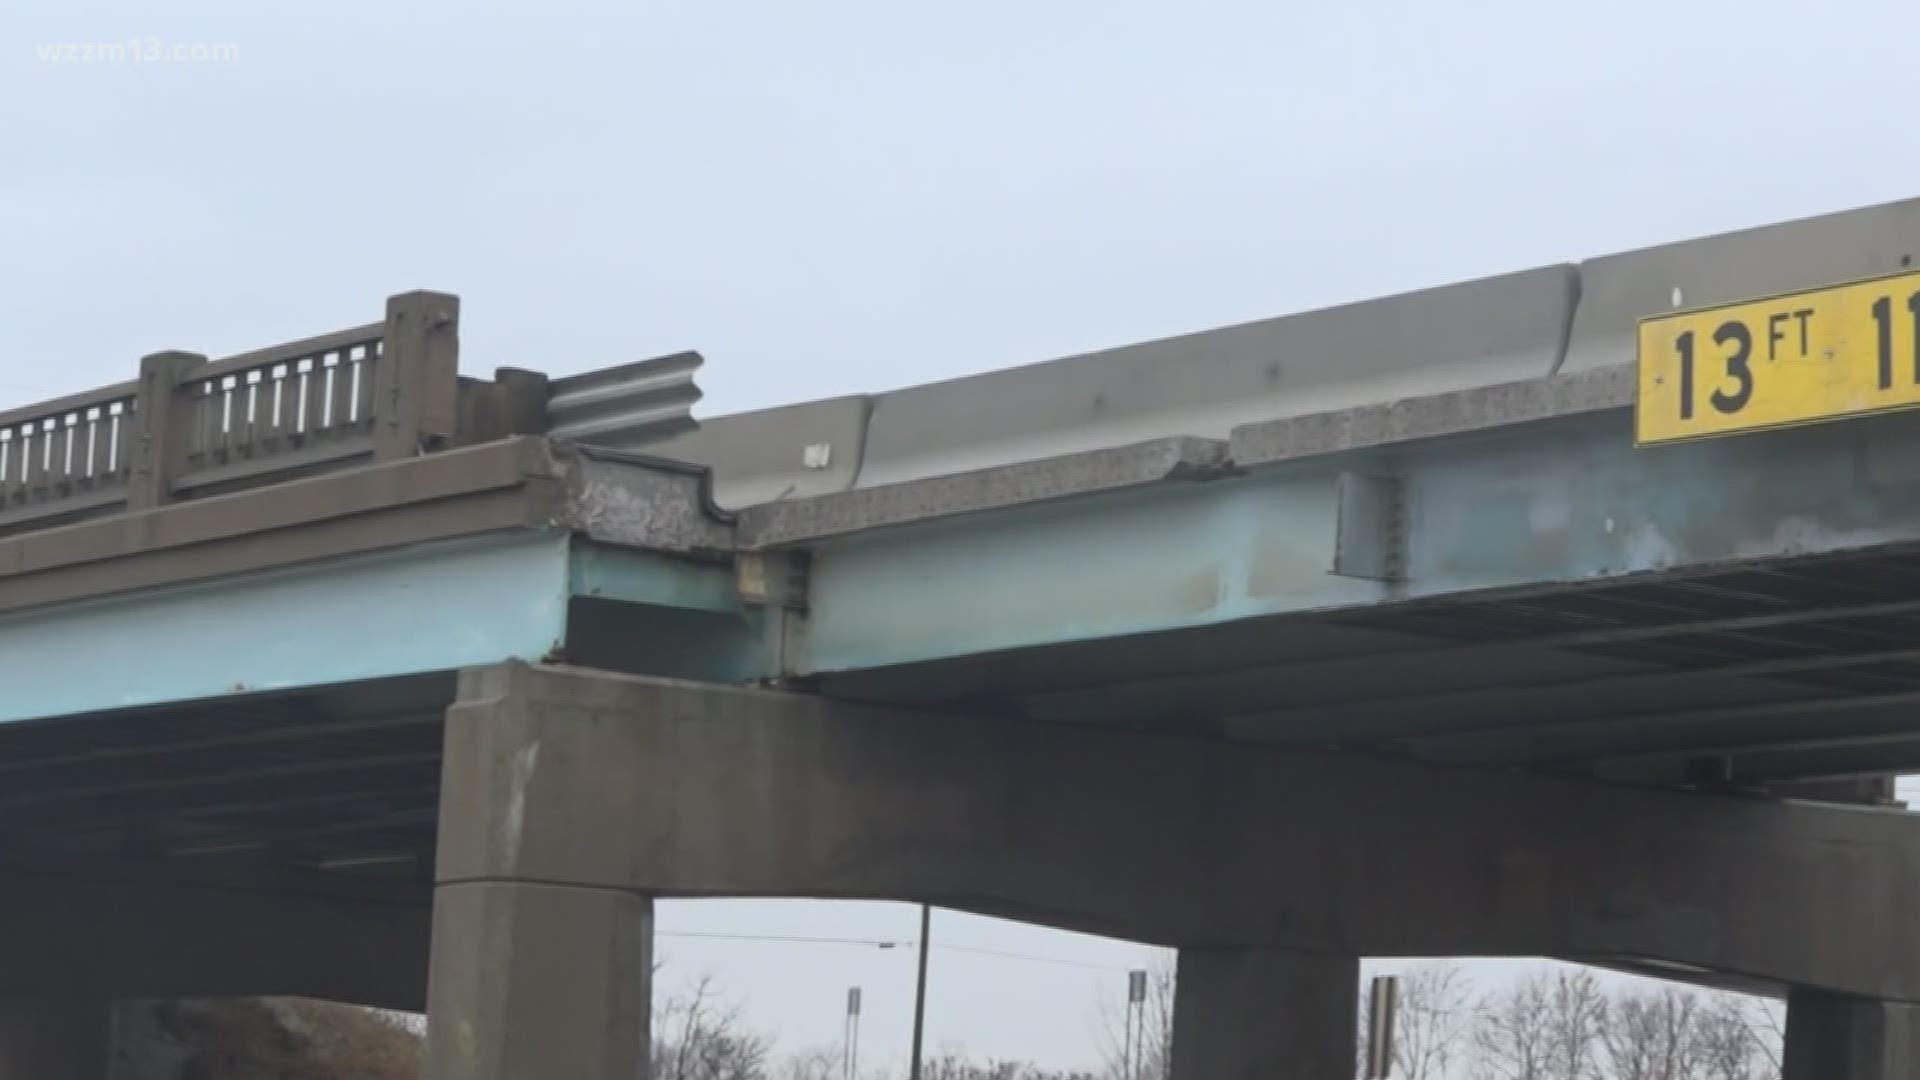 100th Street Bridge closed and another truck hit it